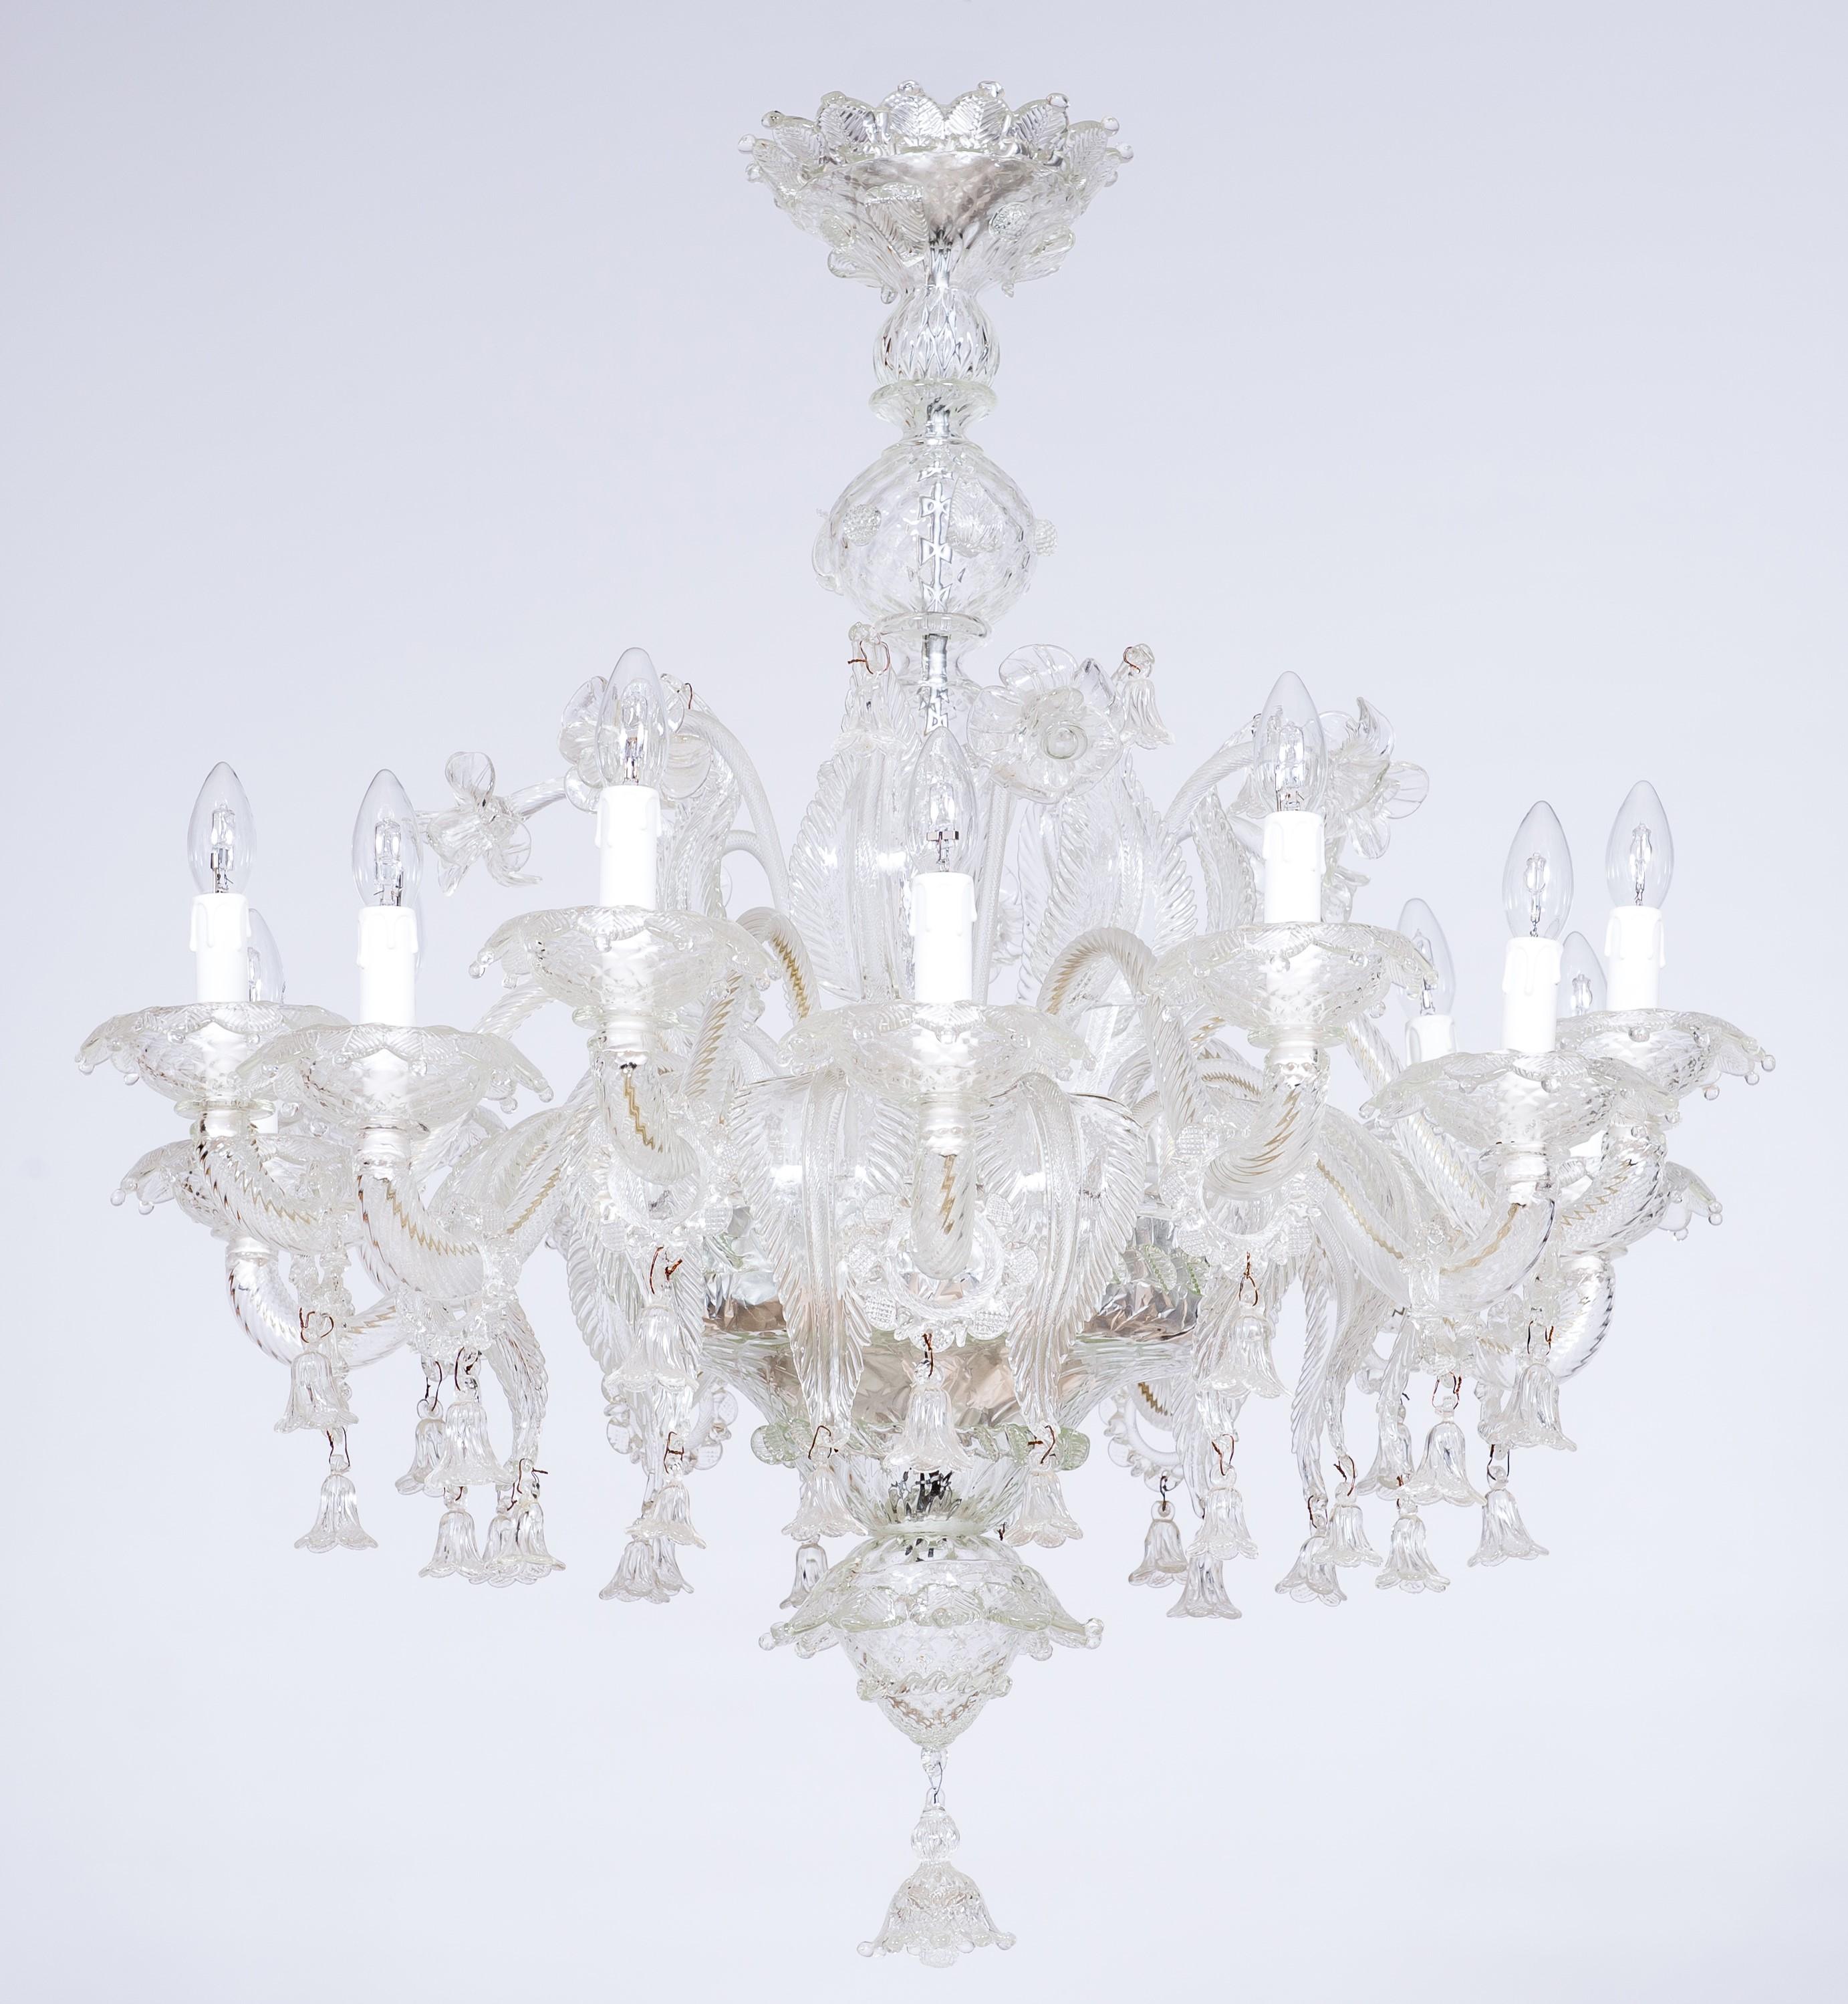 Venetian Chandelier in Transparent Murano Glass, Italy 1950s.
This beautiful chandelier was entirely hand-crafted in the island of Murano (Italy) during 1950s. This ancient artwork is characterized by an exquisitely decorated framework and 14 curved